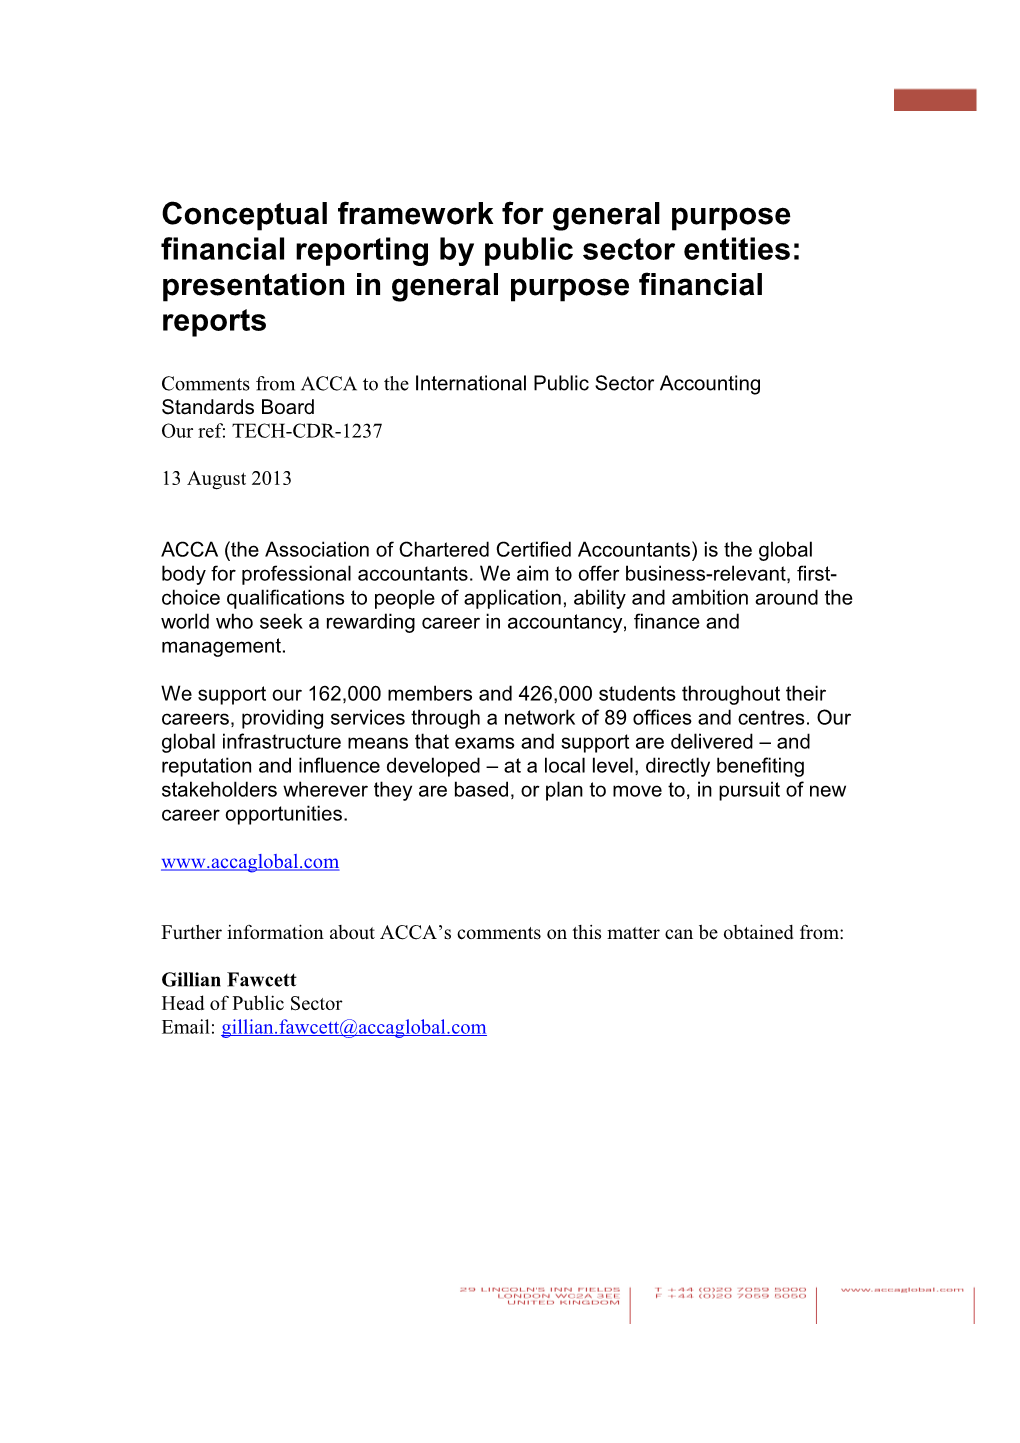 Comments from ACCA to the International Public Sector Accounting Standards Board